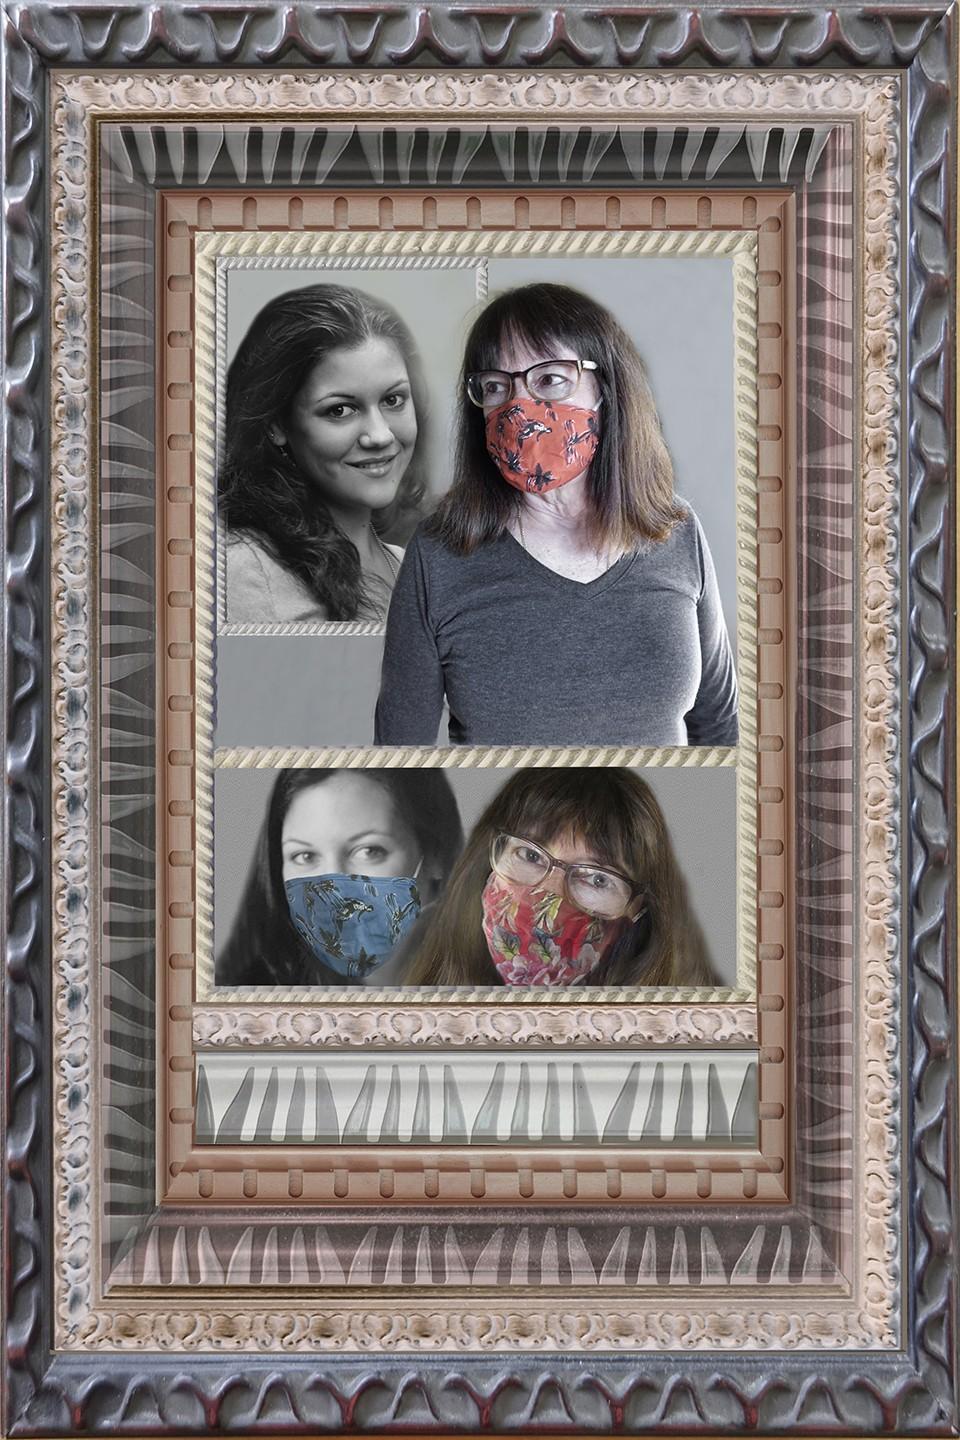 Robin Botie of Ithaca, New York, photoshops herself and her daughter who died wearing masks like they did back in the days of cancer and caregiving, and took precautions similar to those taken for the COVID pandemic.